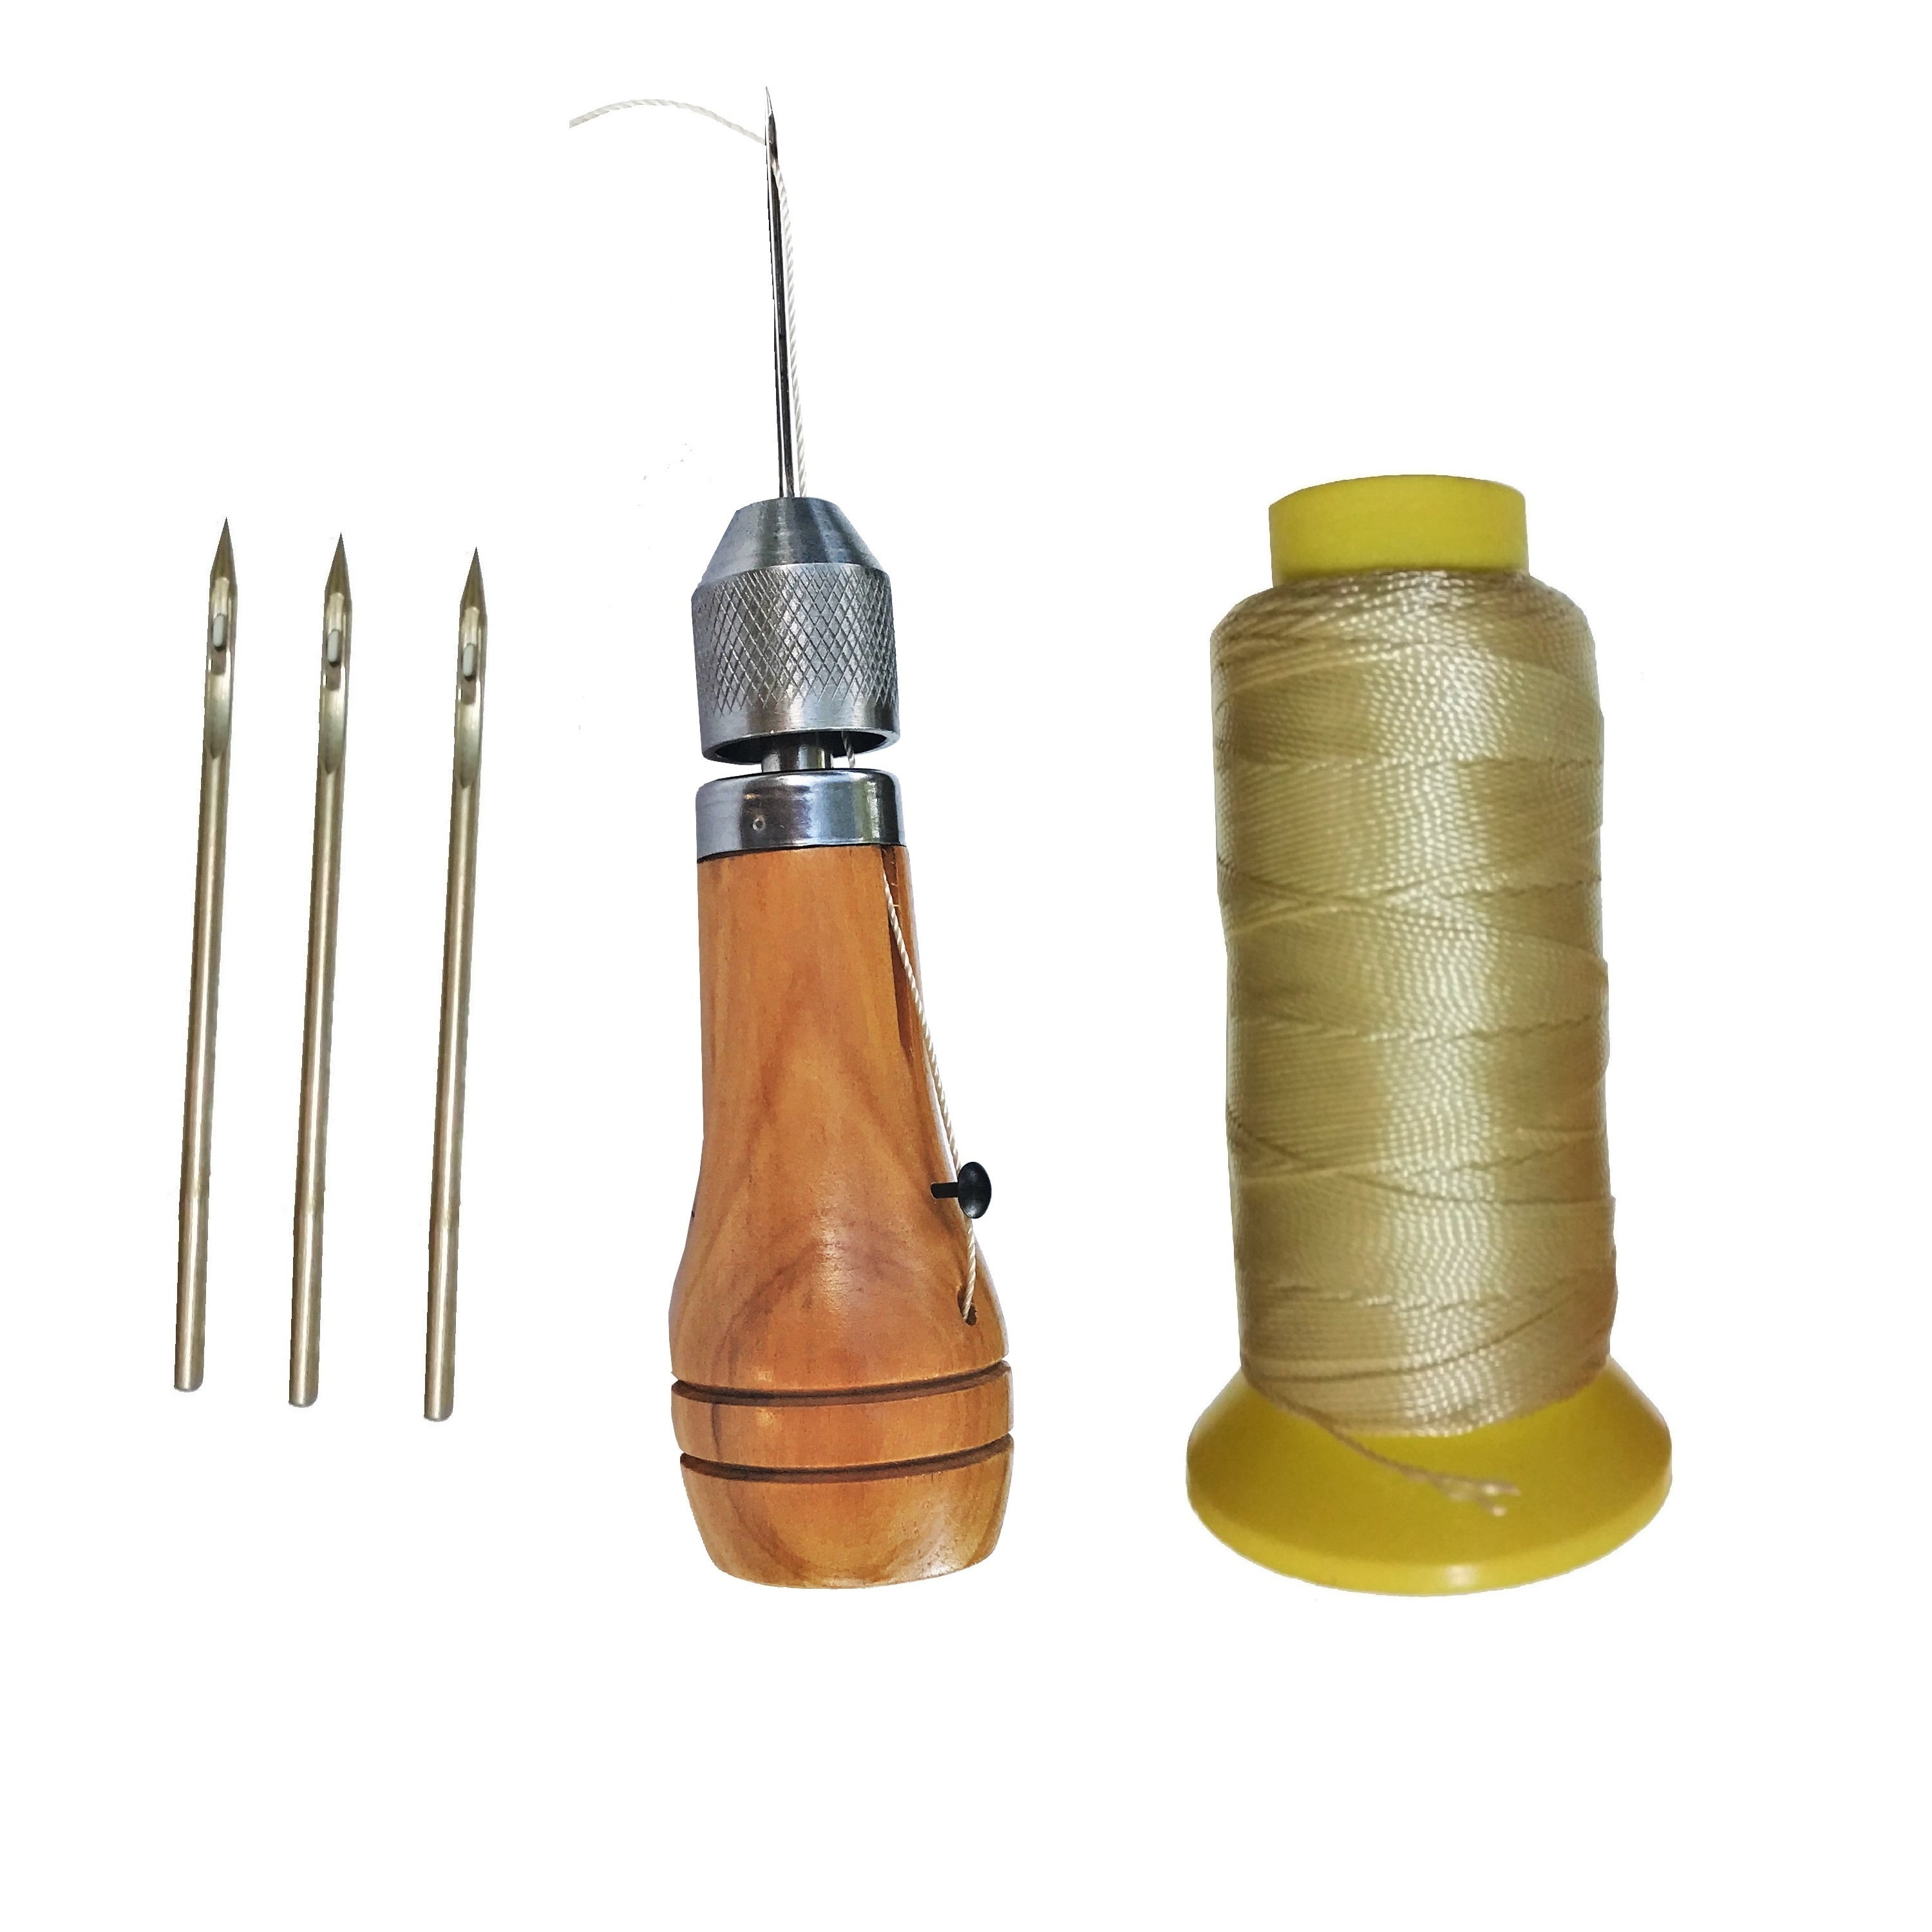 Canvas Leather Tent Sewing Awl Hand Stitcher Leather Craft Needle Kit ToolF4 